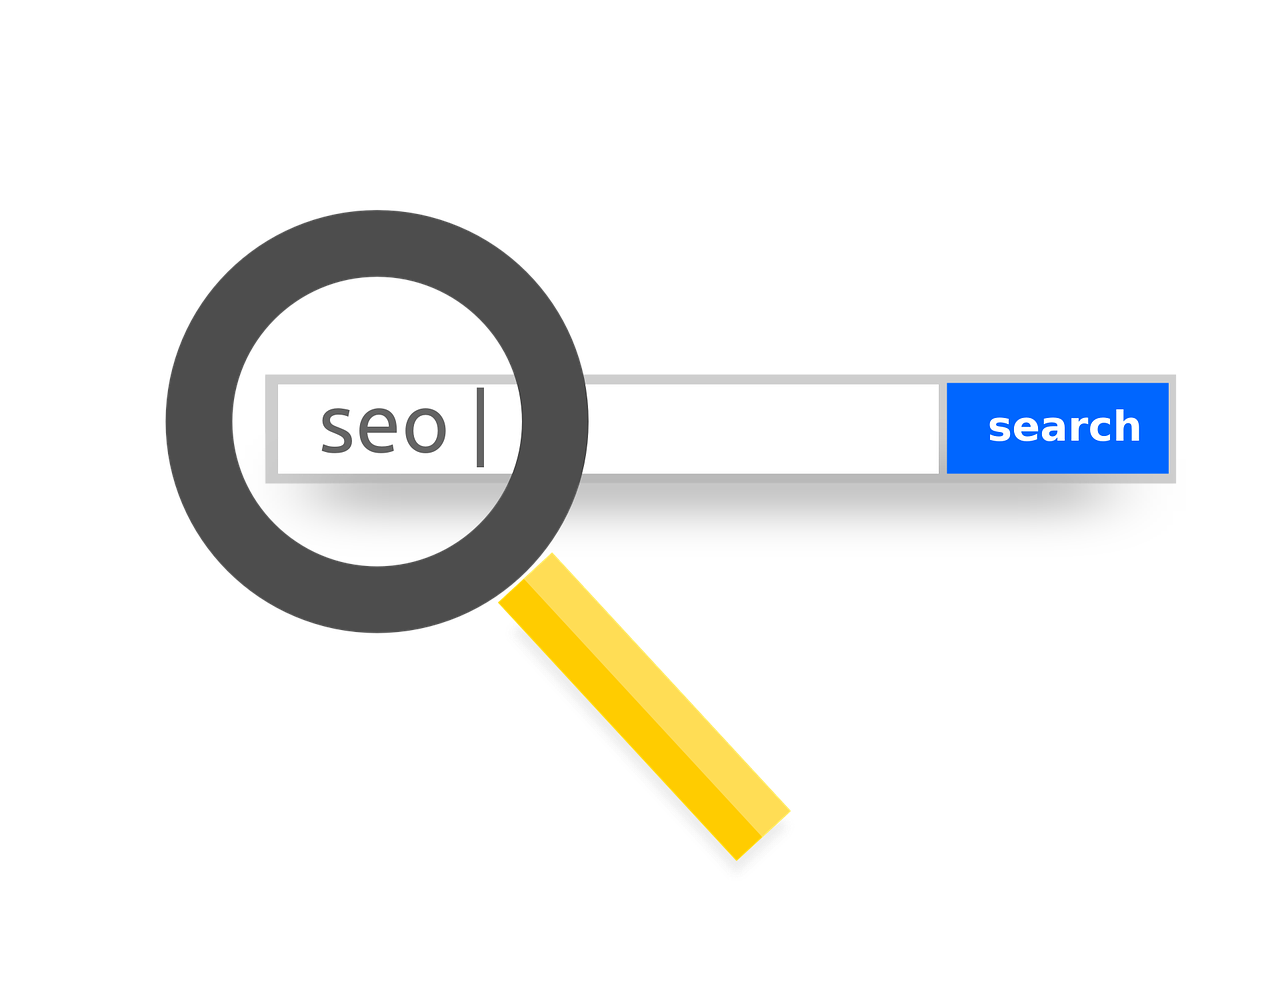 How To Improve SEO - Strategies To Try First